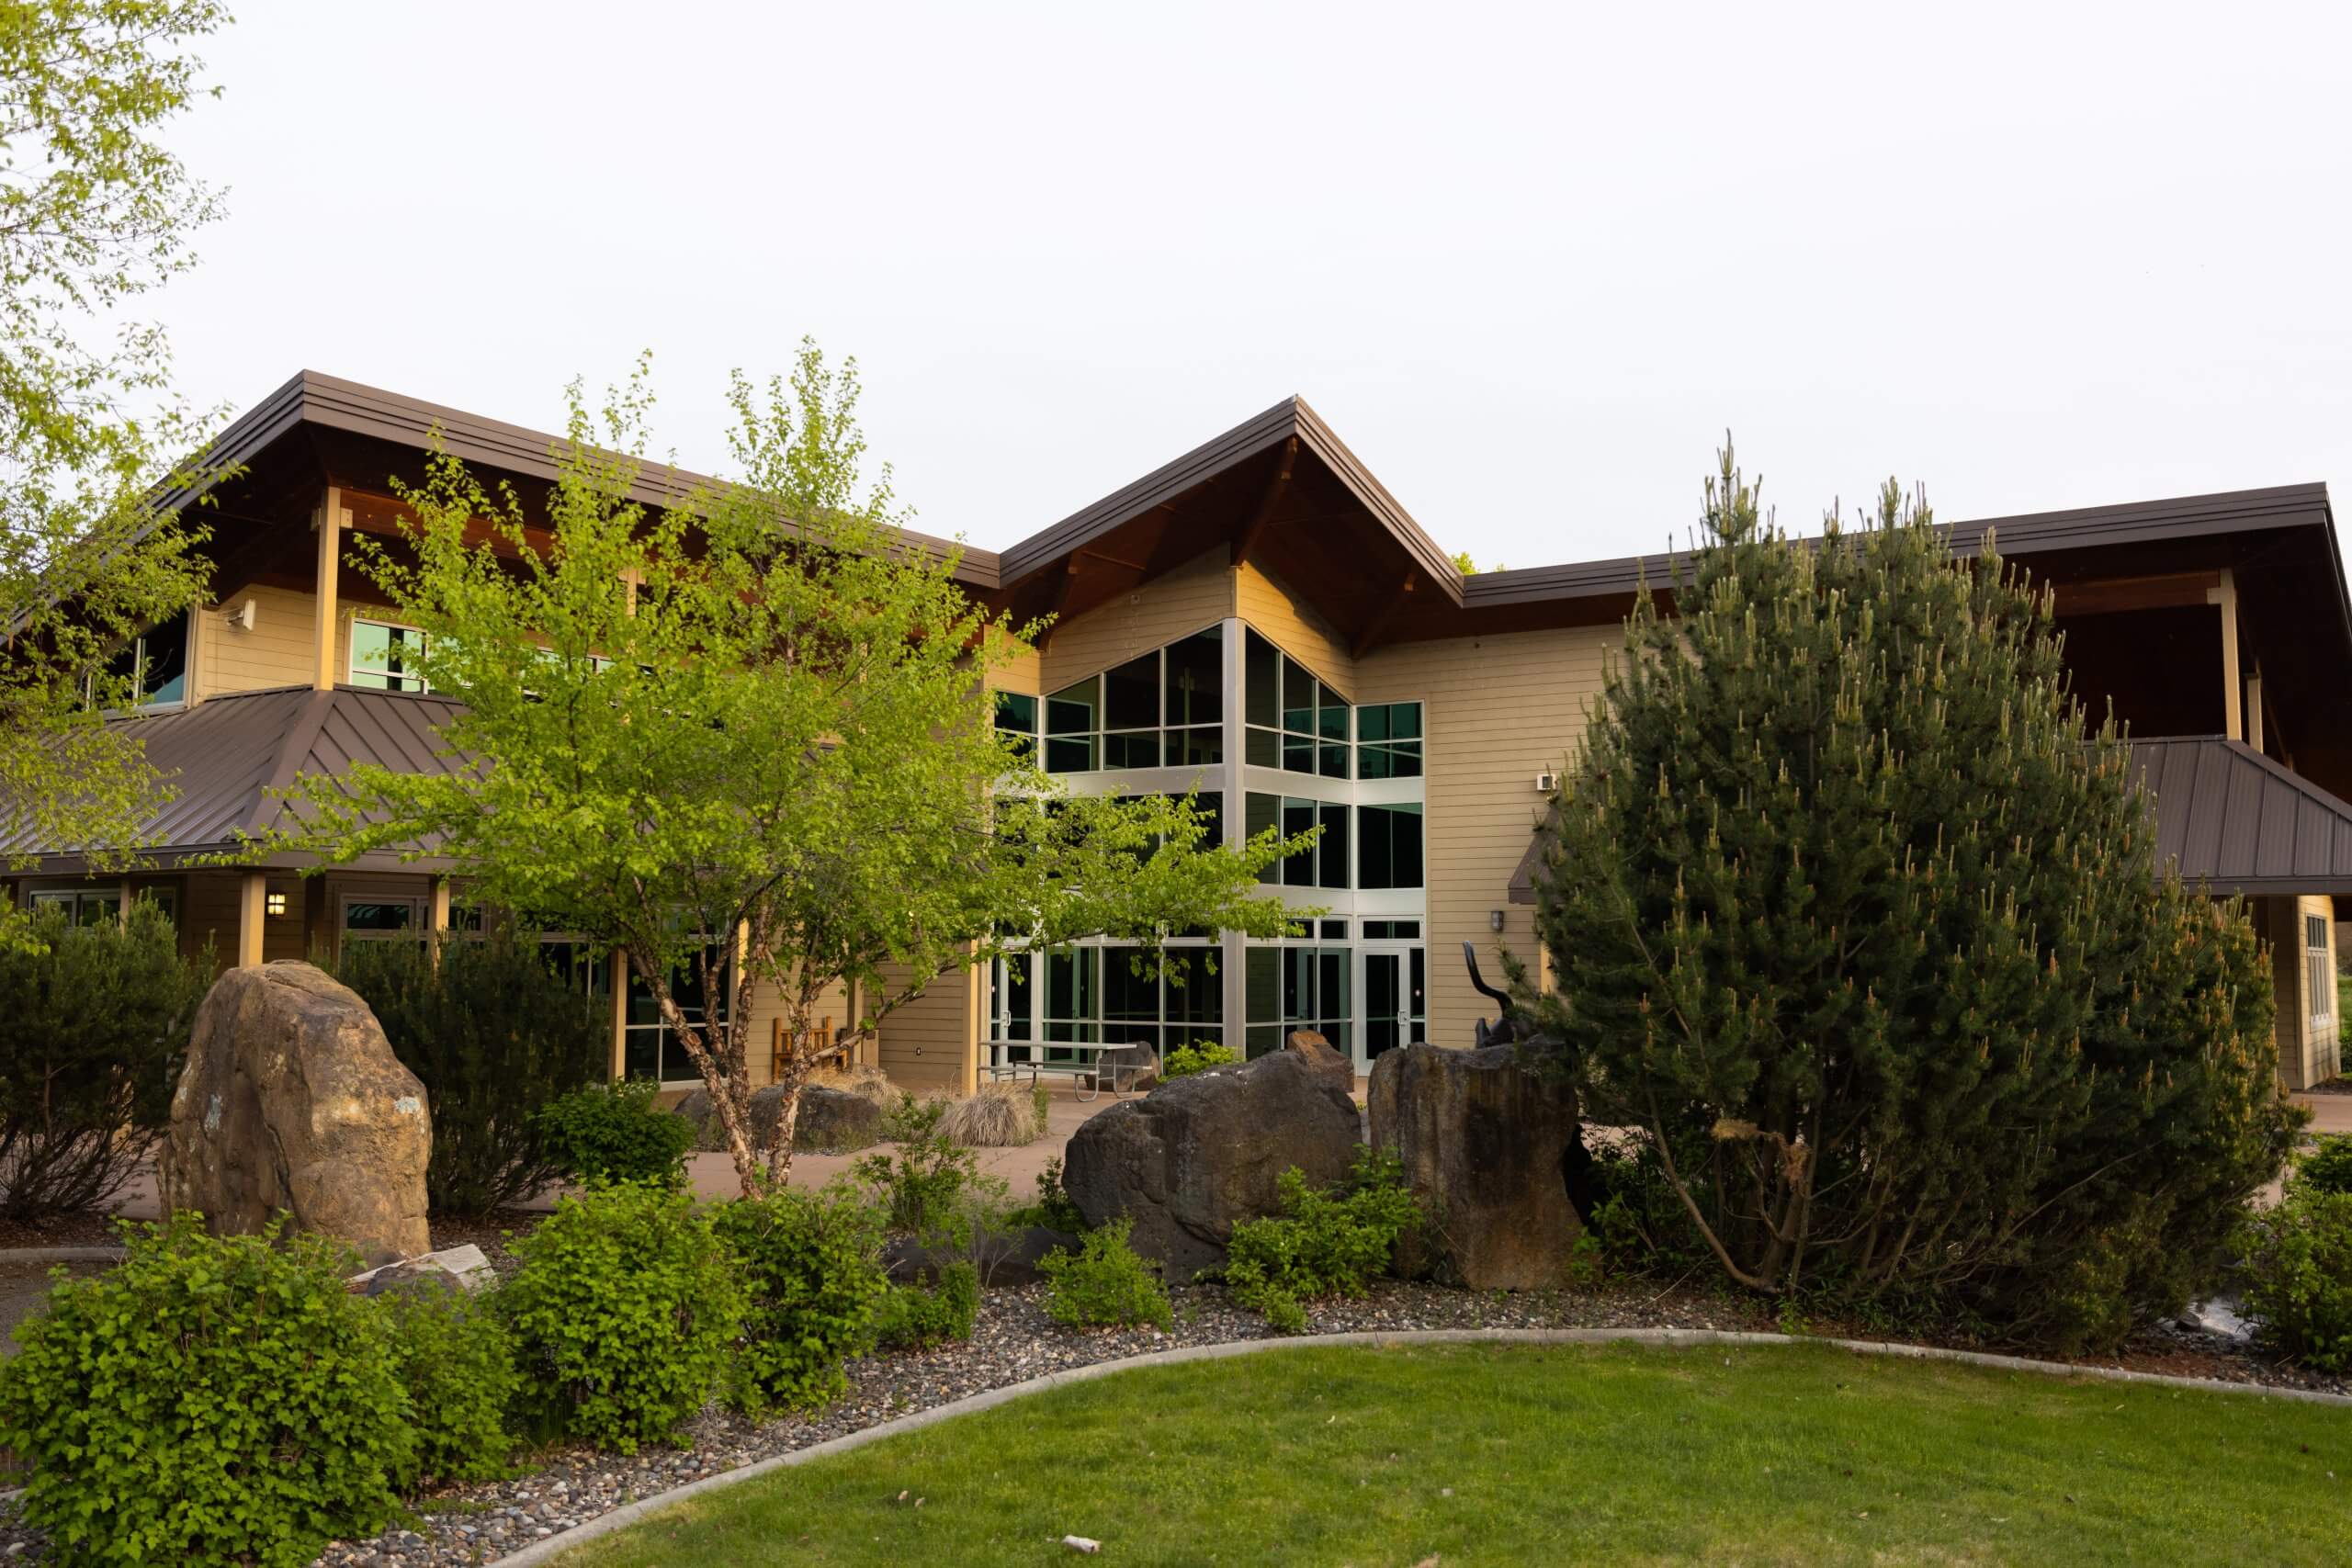 Exterior of the Lewis and Clark Discovery Center.